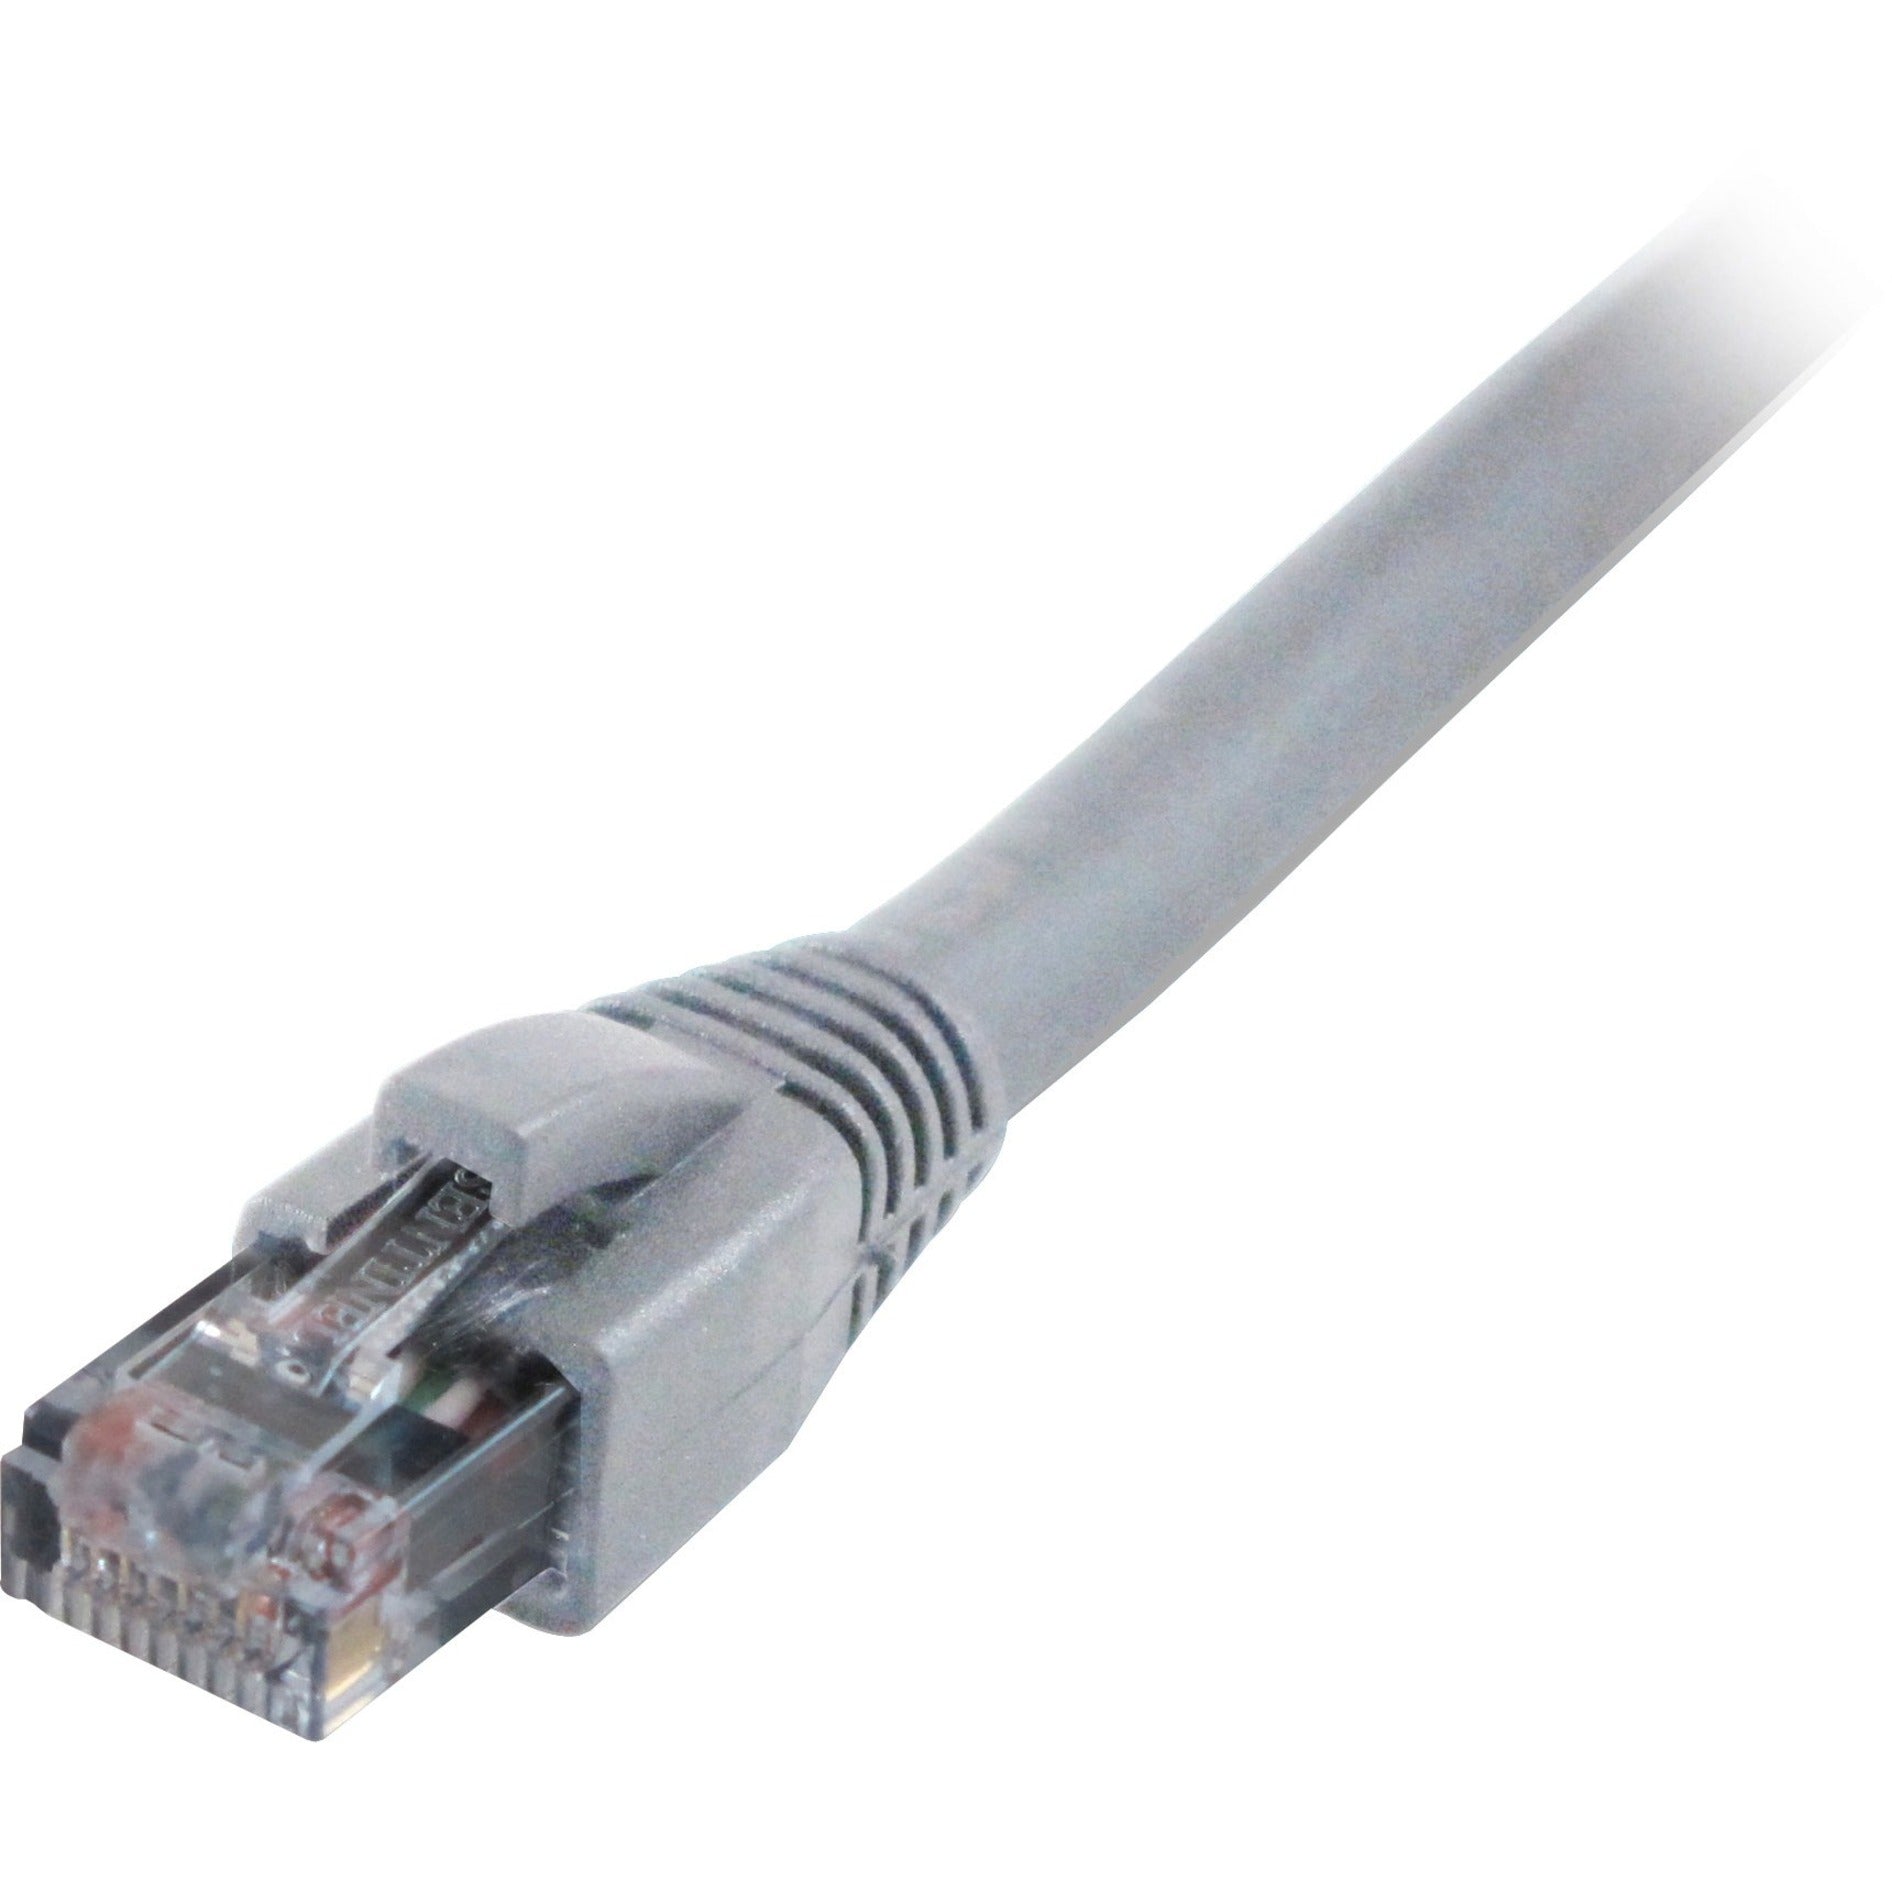 Comprehensive CAT5-350-100GRY Cat5e 350 Mhz Snagless Patch Cable 100ft Gray, Molded, Strain Relief, Stranded, Booted, 1 Gbit/s Data Transfer Rate